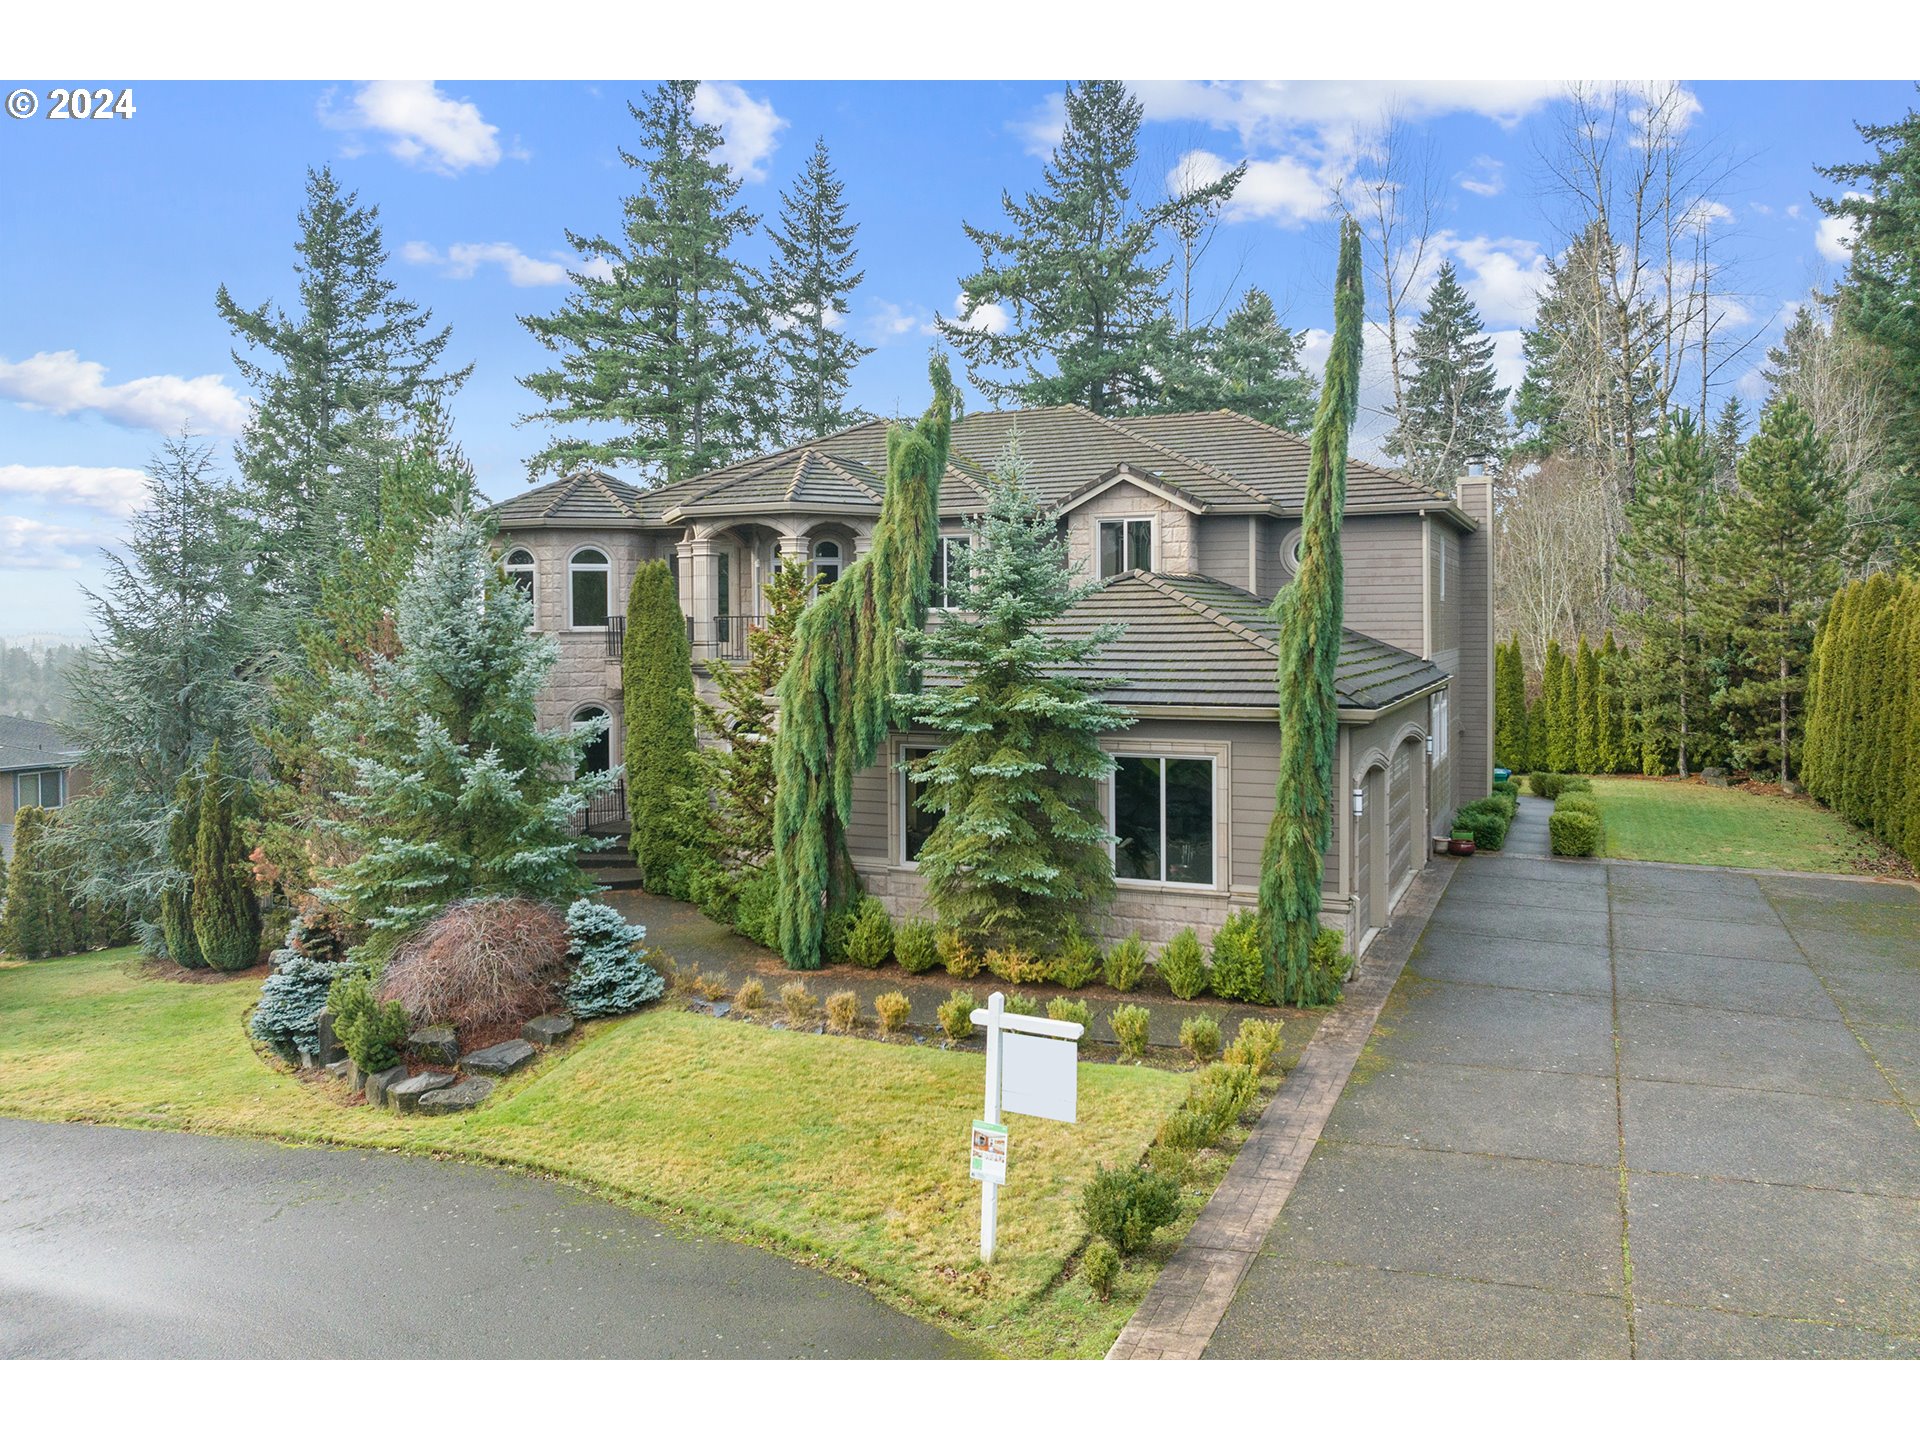 14289 SE WYLER ST, Happy Valley, OR 